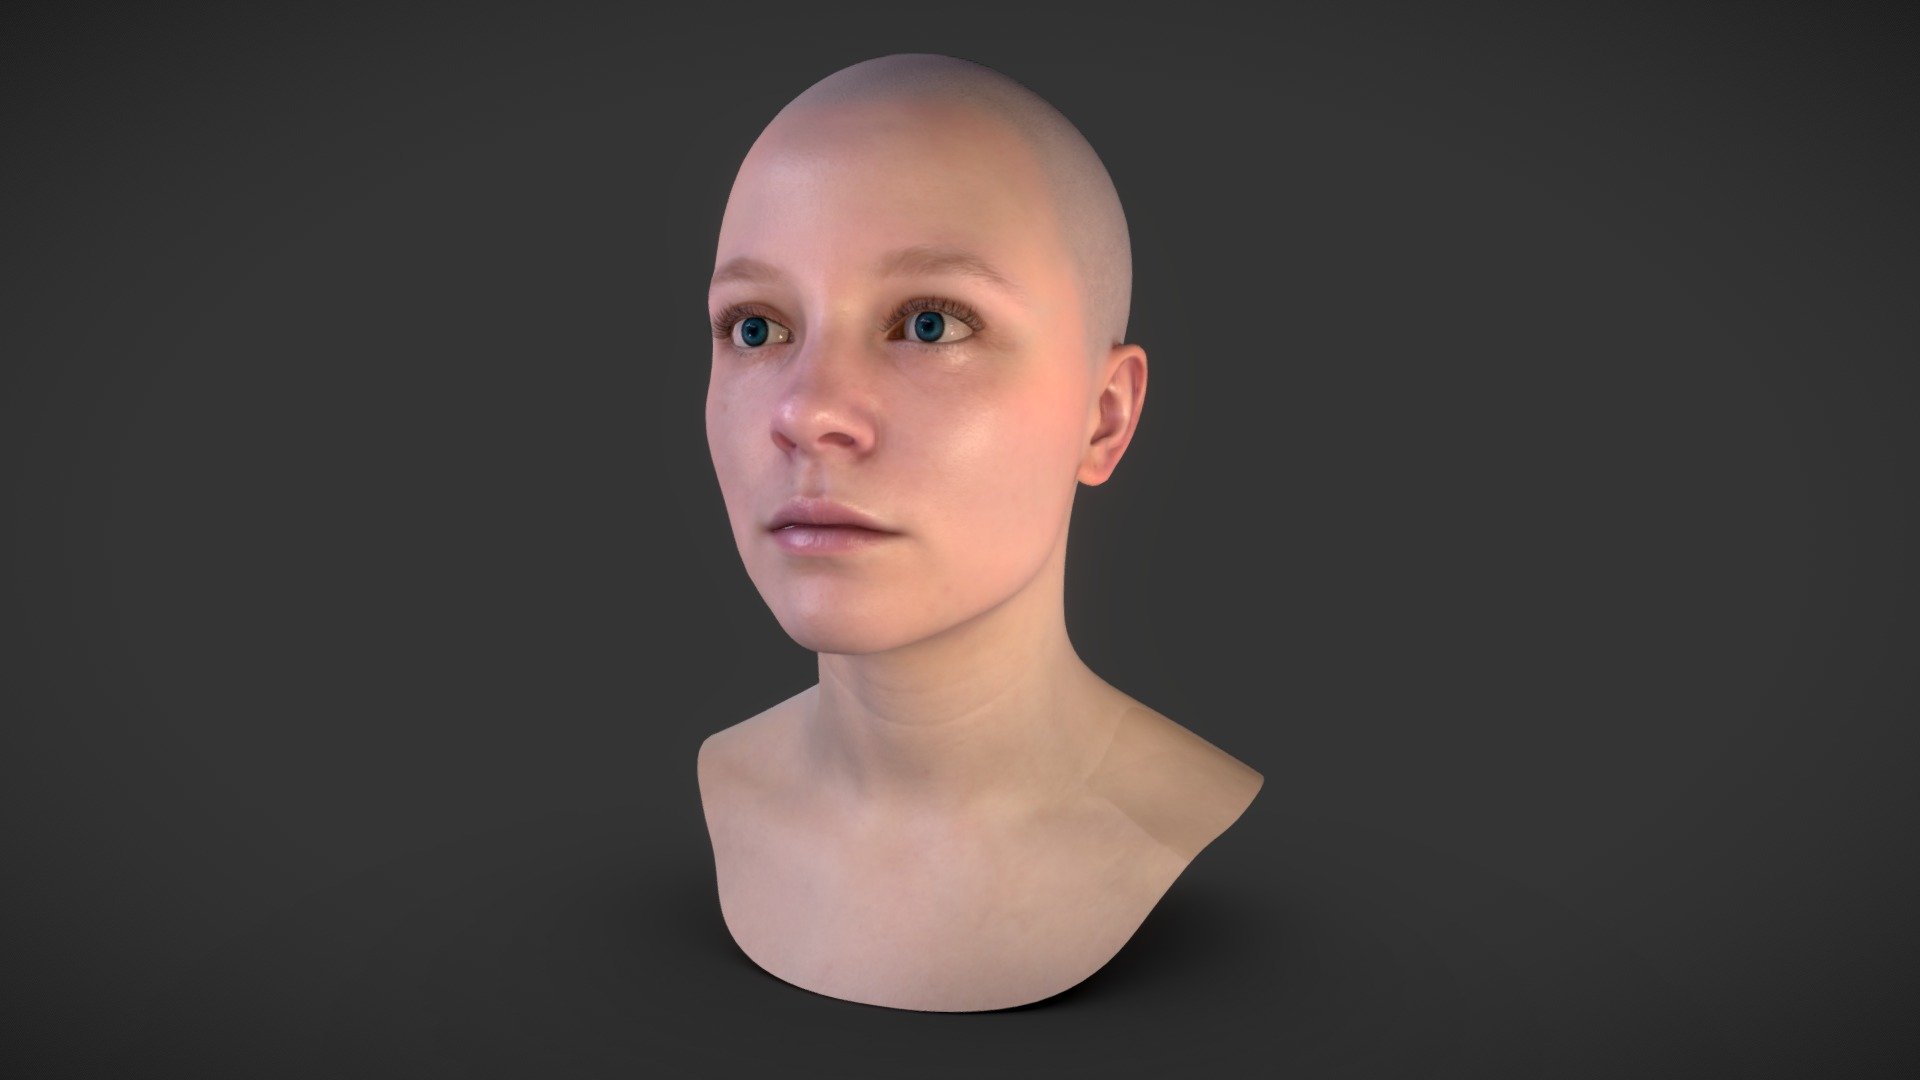 Female Head Scan_01

Cleaned, game ready and animation friendly model of a female head 3d model